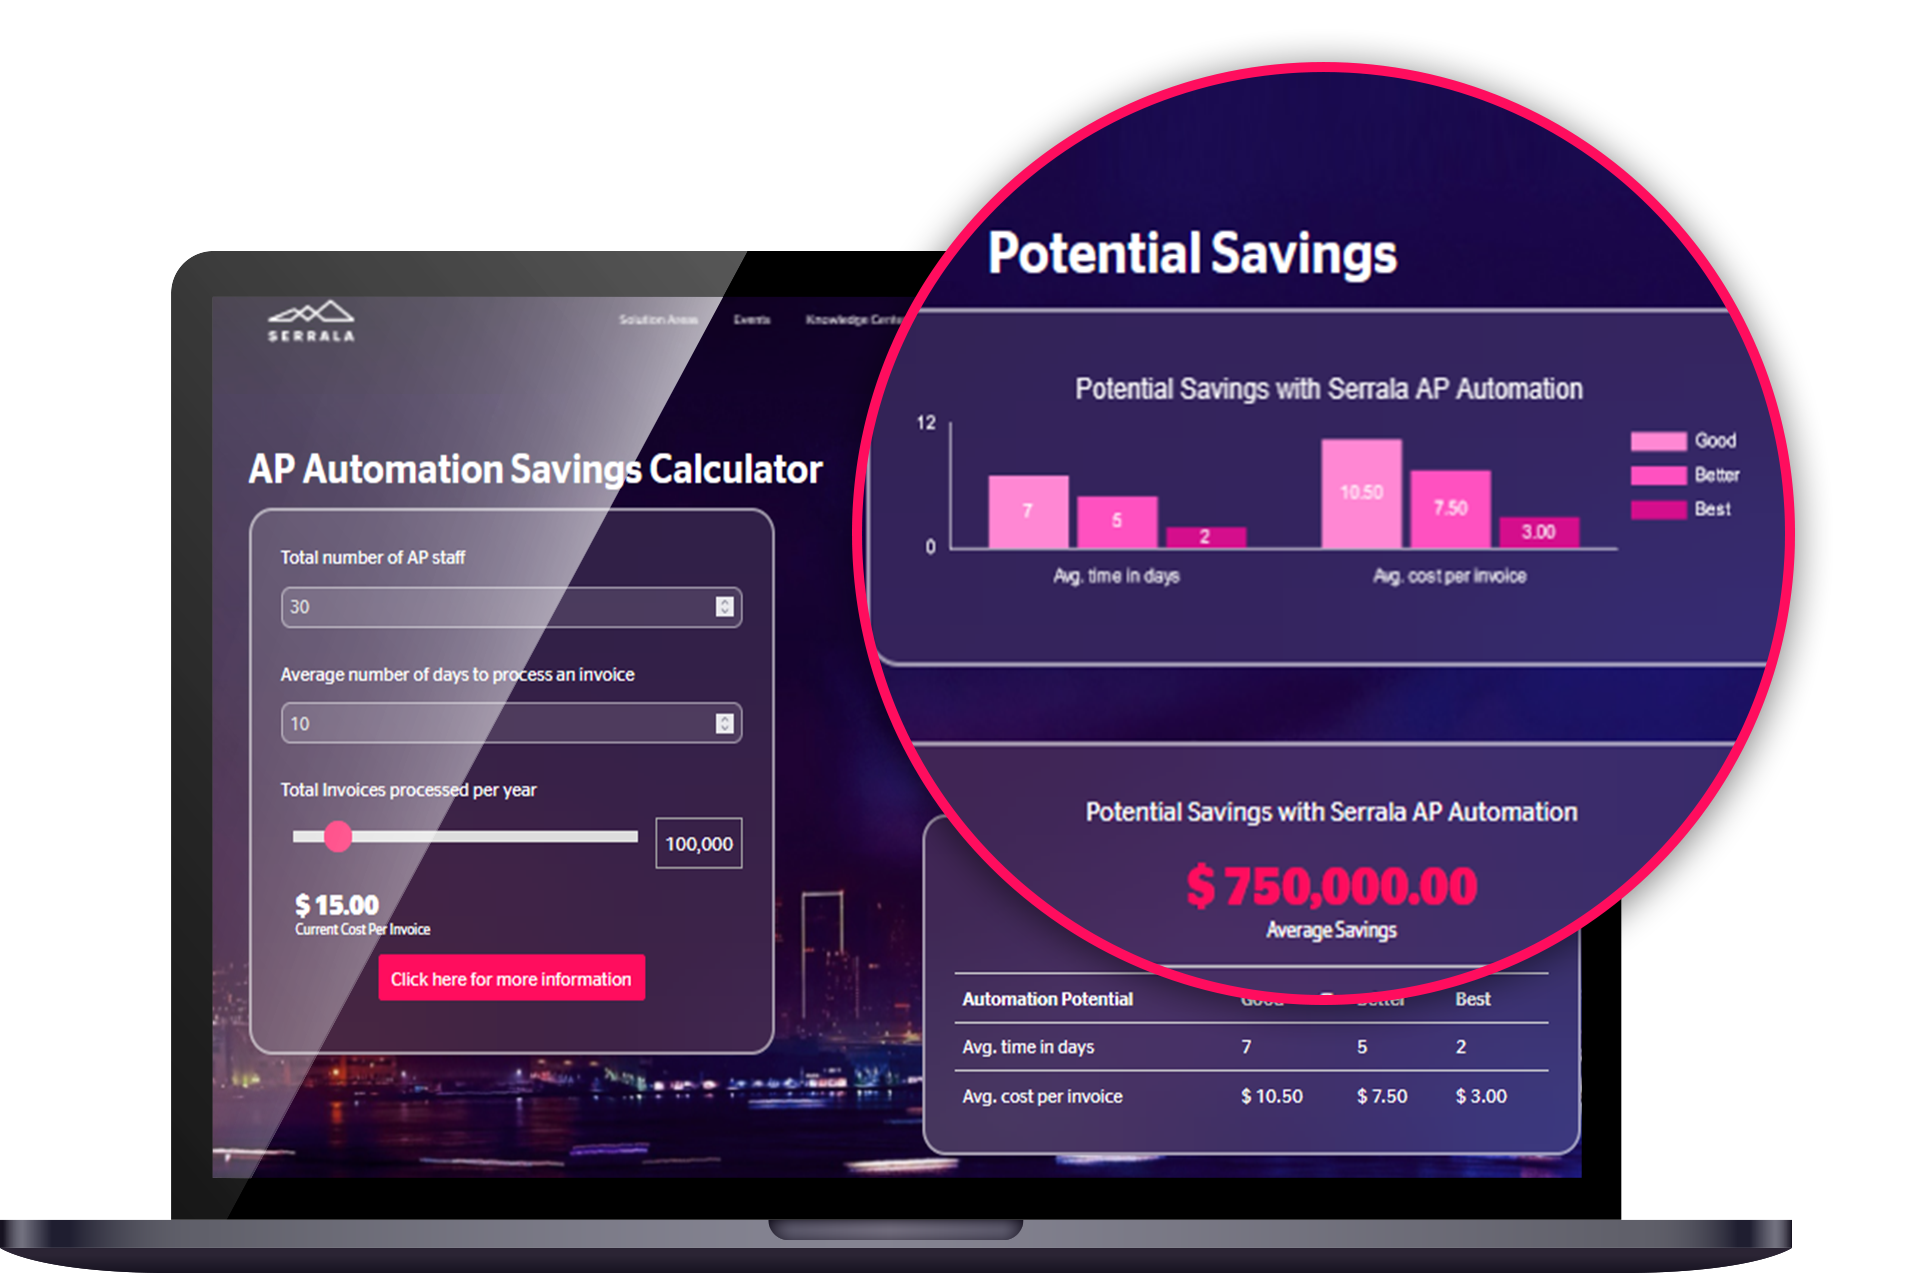 Serrala's Saving Calculator to understand your ROI from AP Automation